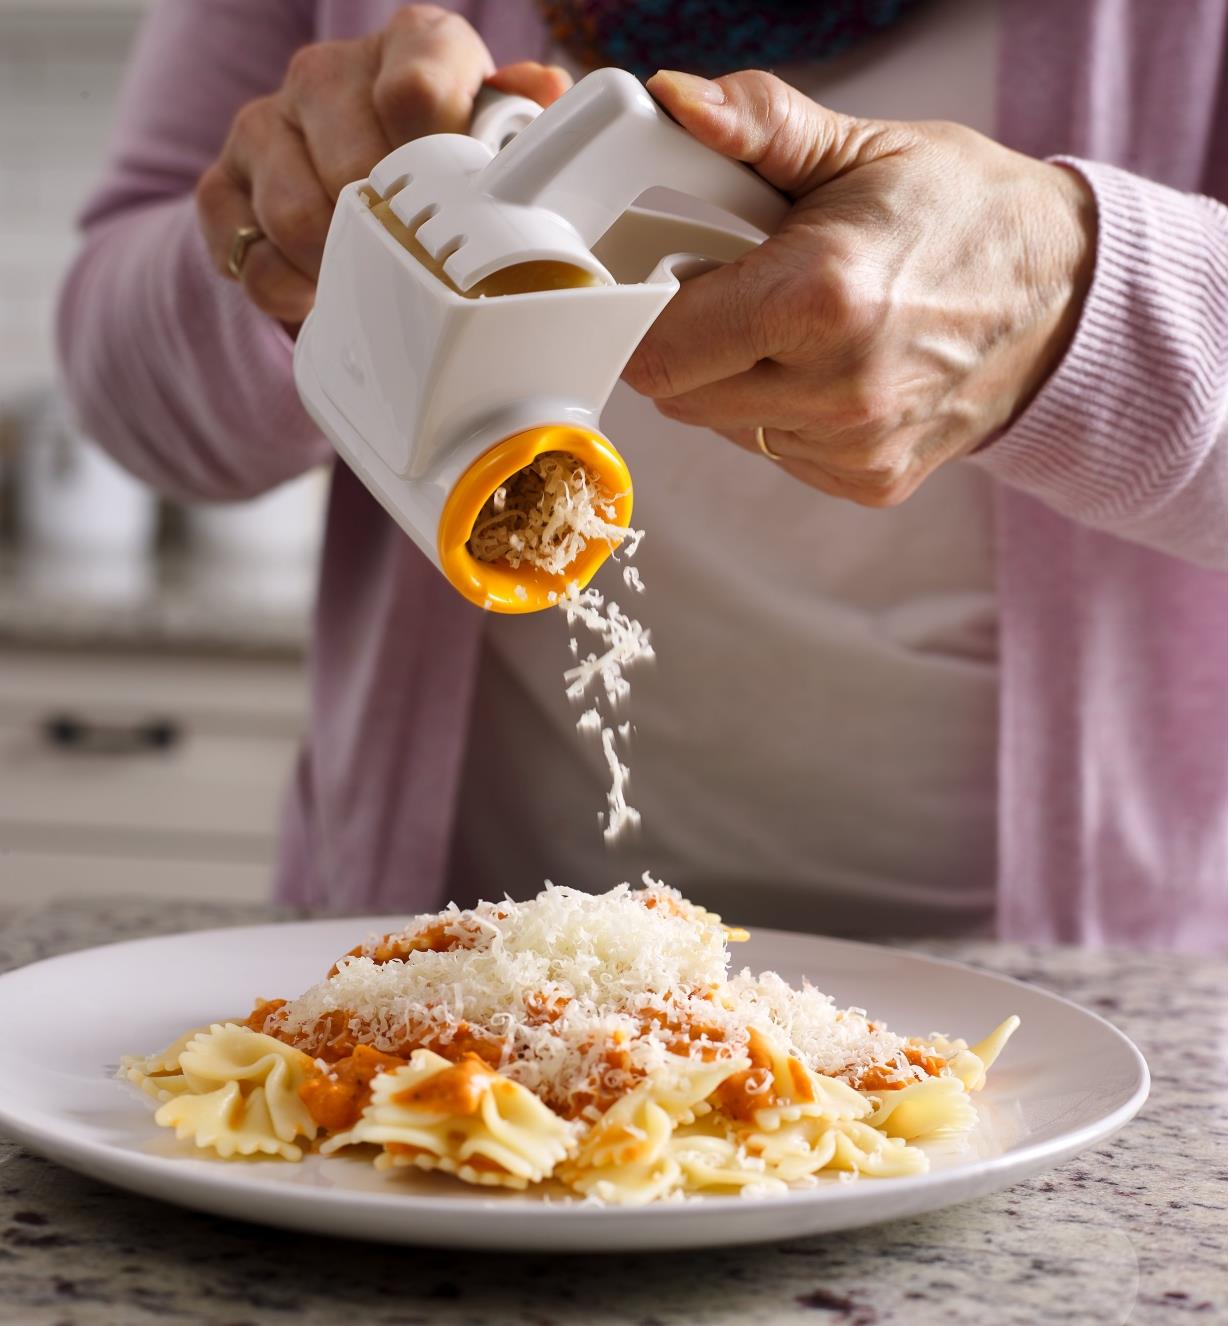 https://assets.leevalley.com/Size4/10109/EV534-rotary-cheese-grater-u-0009.jpg